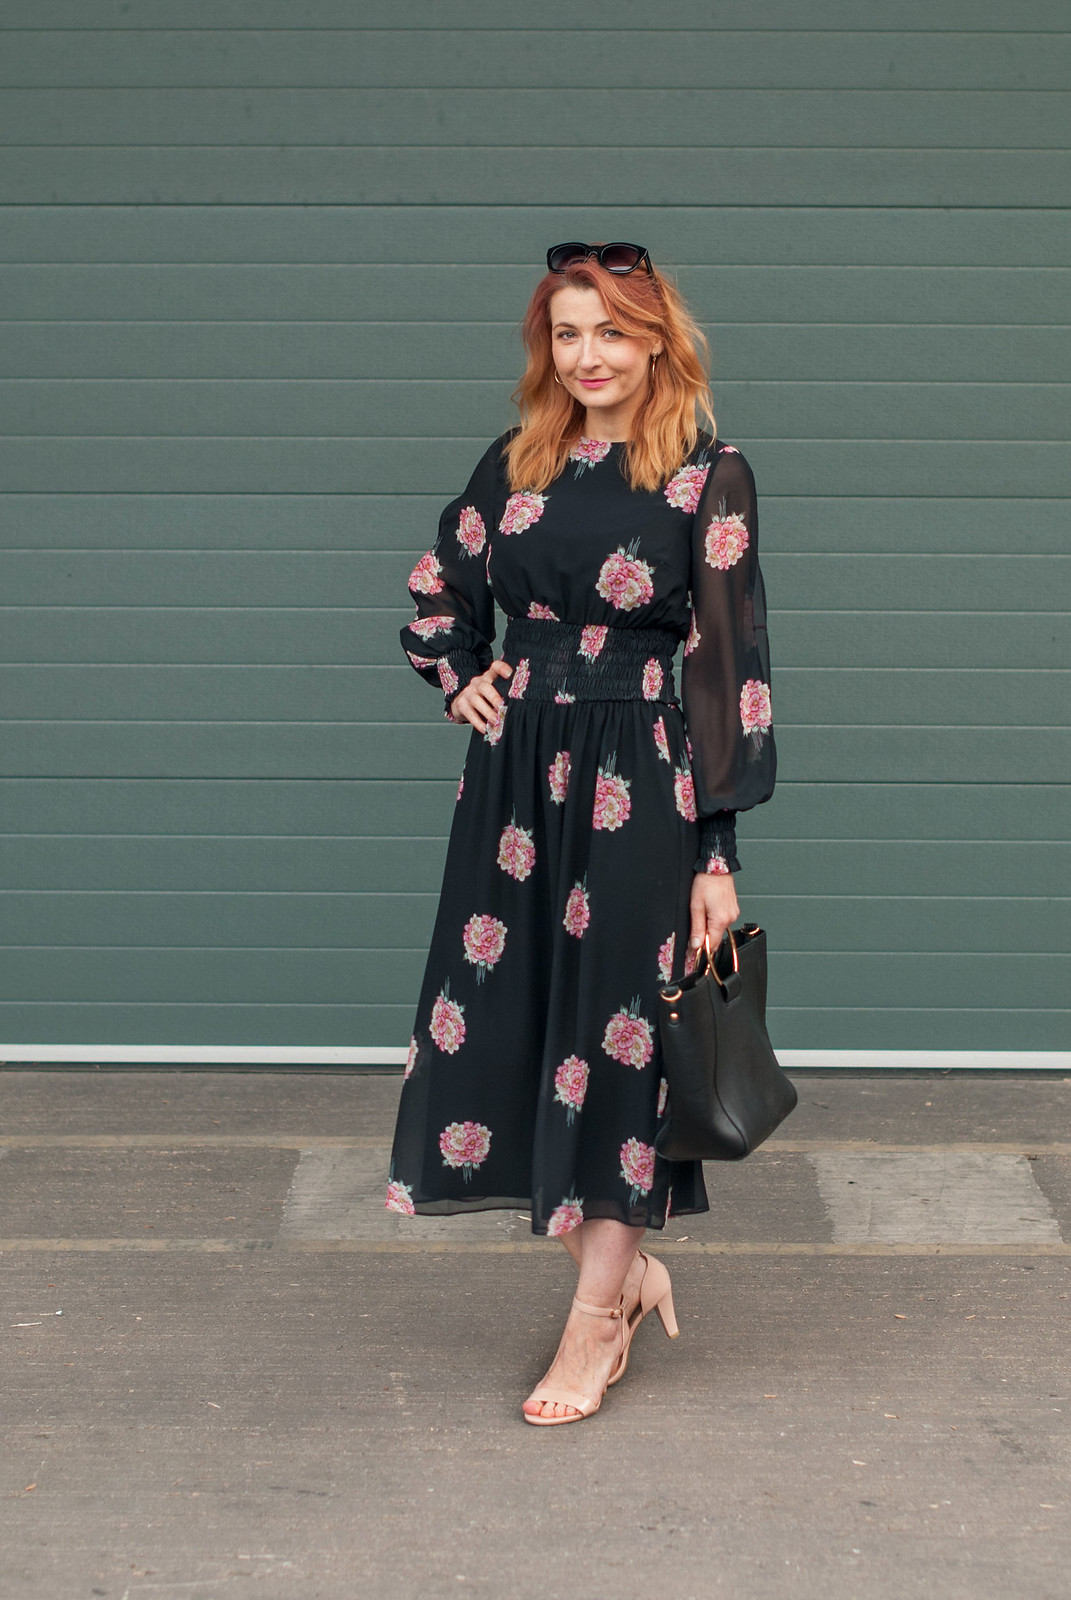 Date night outfit, evening look - Sheer dark floral shirred waist midi dress - | Not Dressed As Lamb, over 40 style